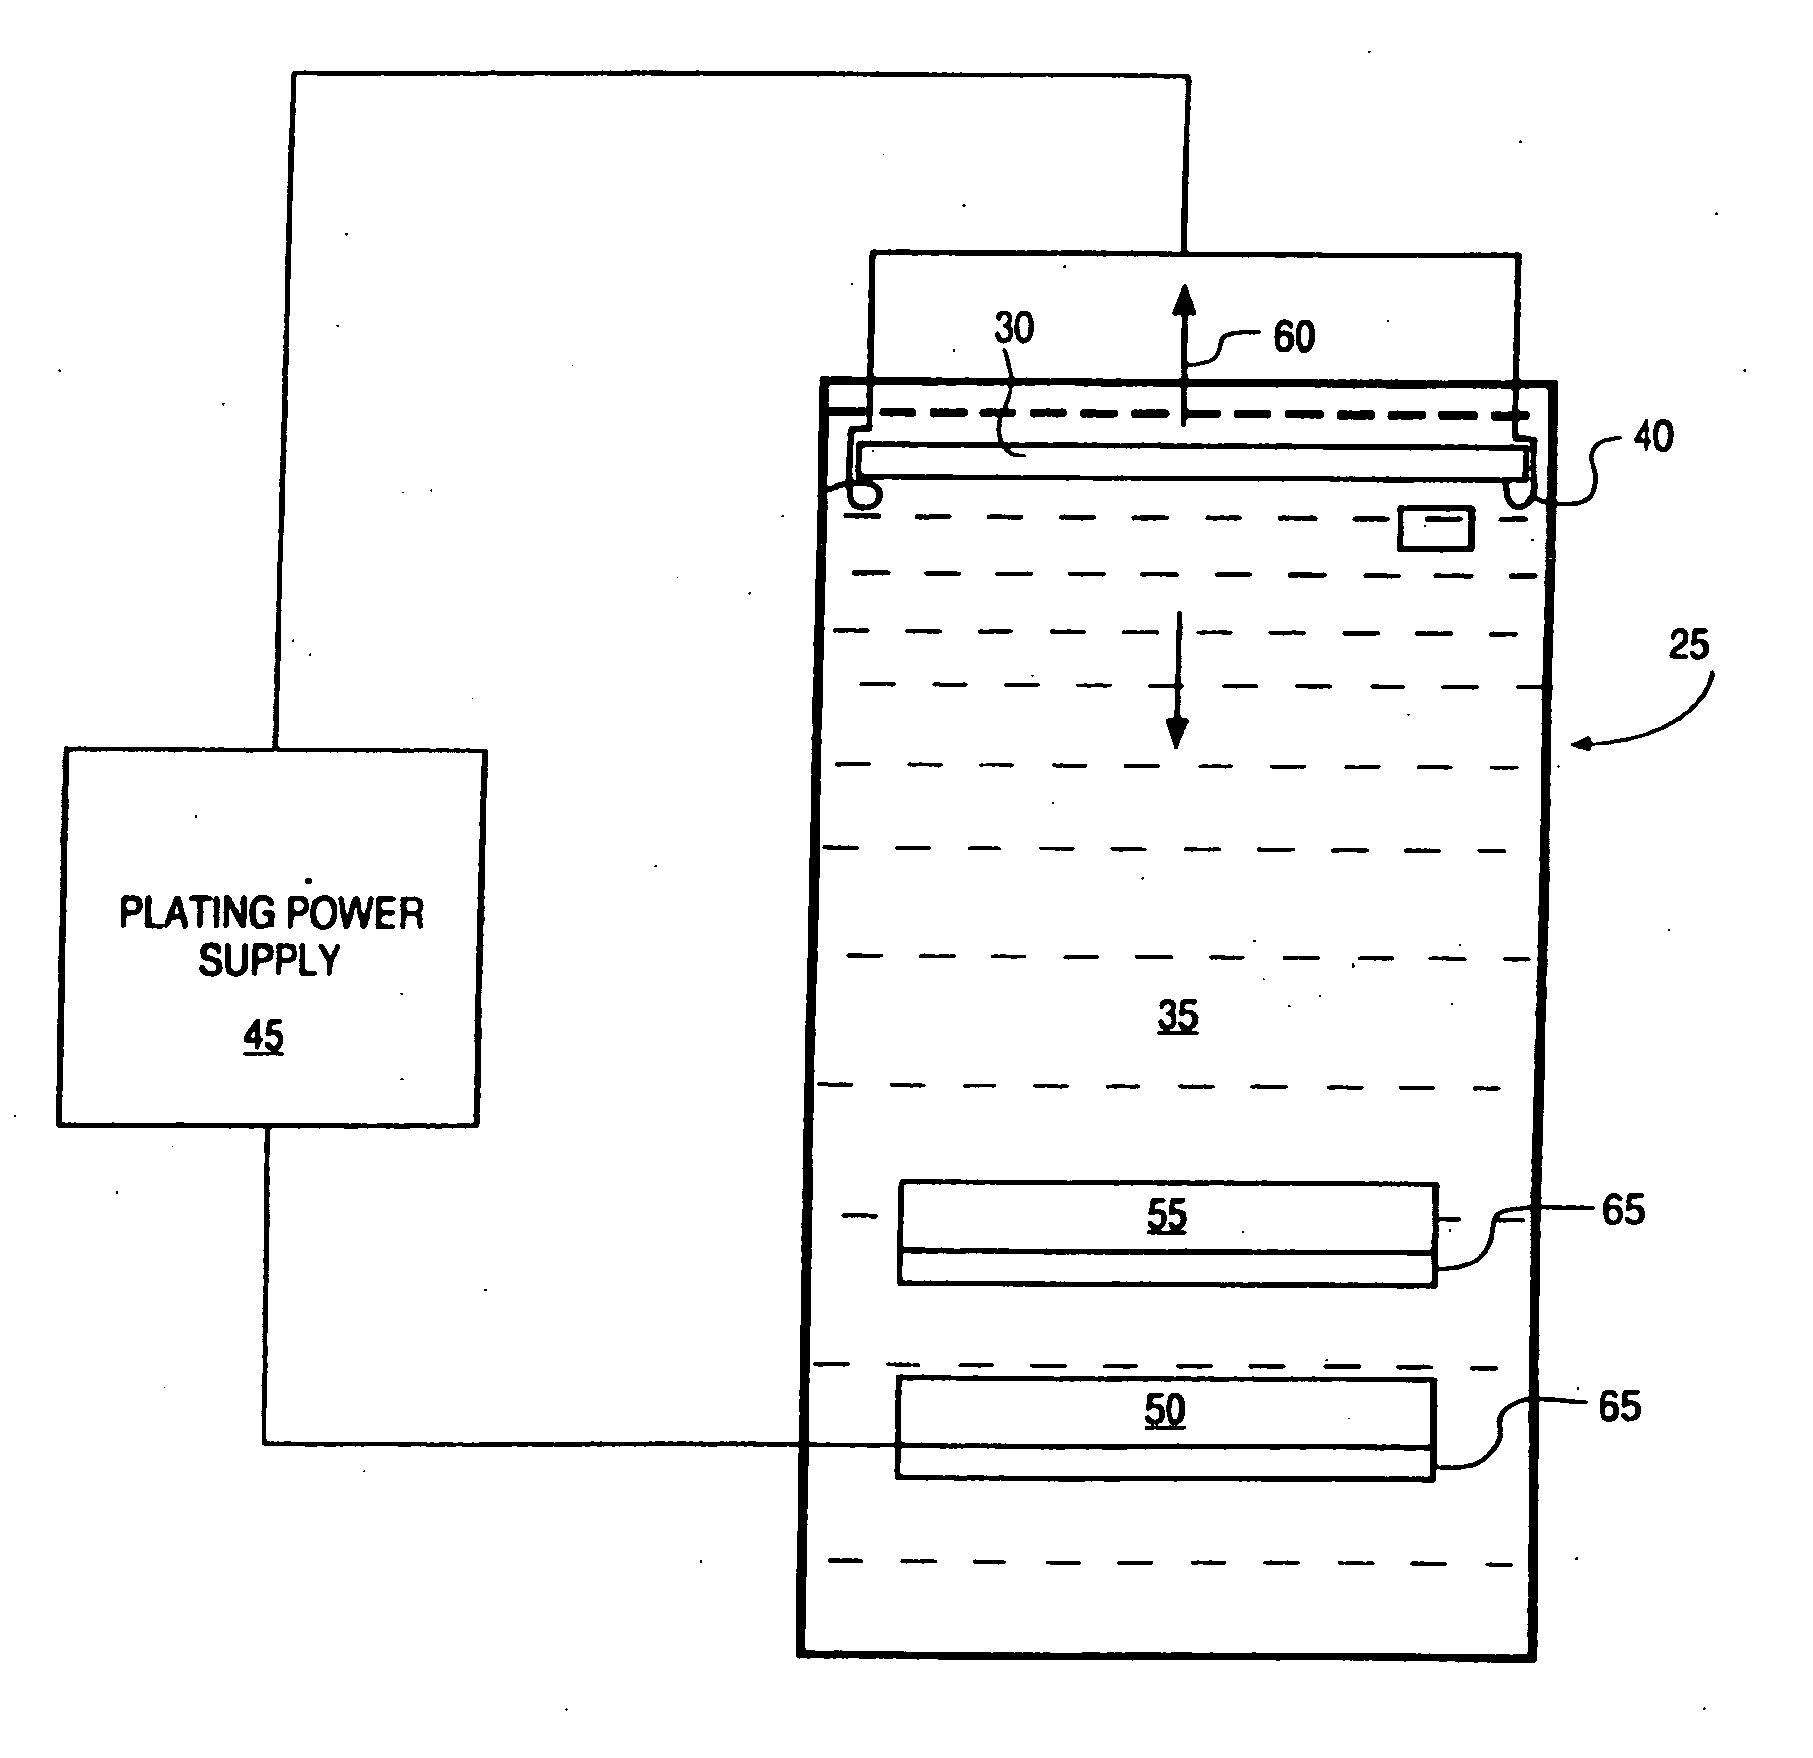 Apparatus and method for electrolytically depositing copper on a semiconductor workpiece